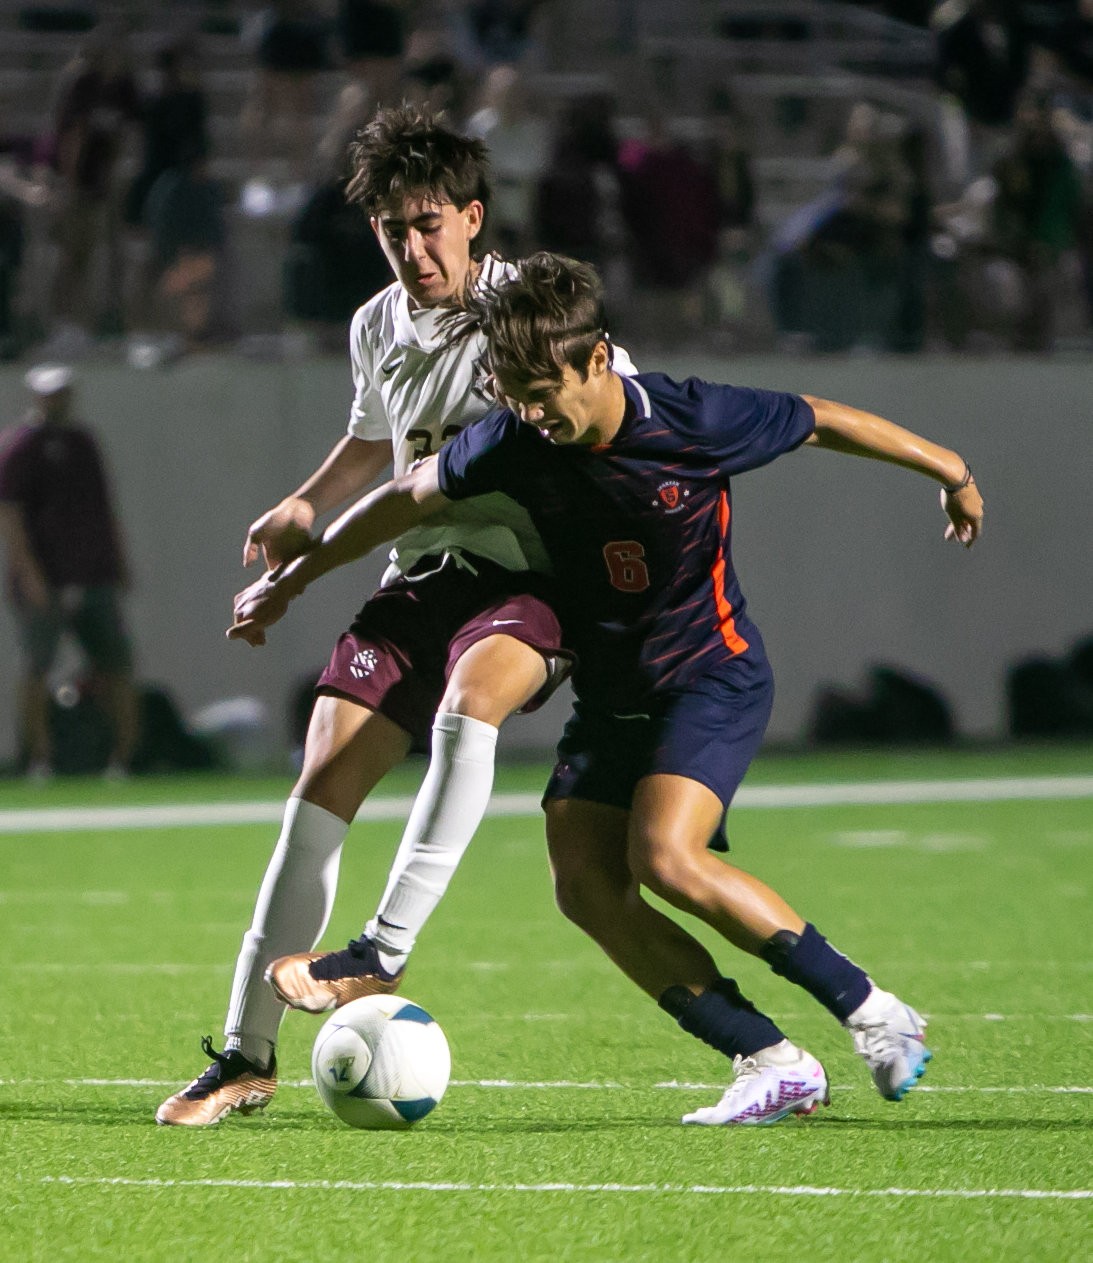 Kortay Koc fights for a ball during Friday's Class 6A Regional Quarterfinal game between Seven Lakes and Cinco Ranch at Legacy Stadium.